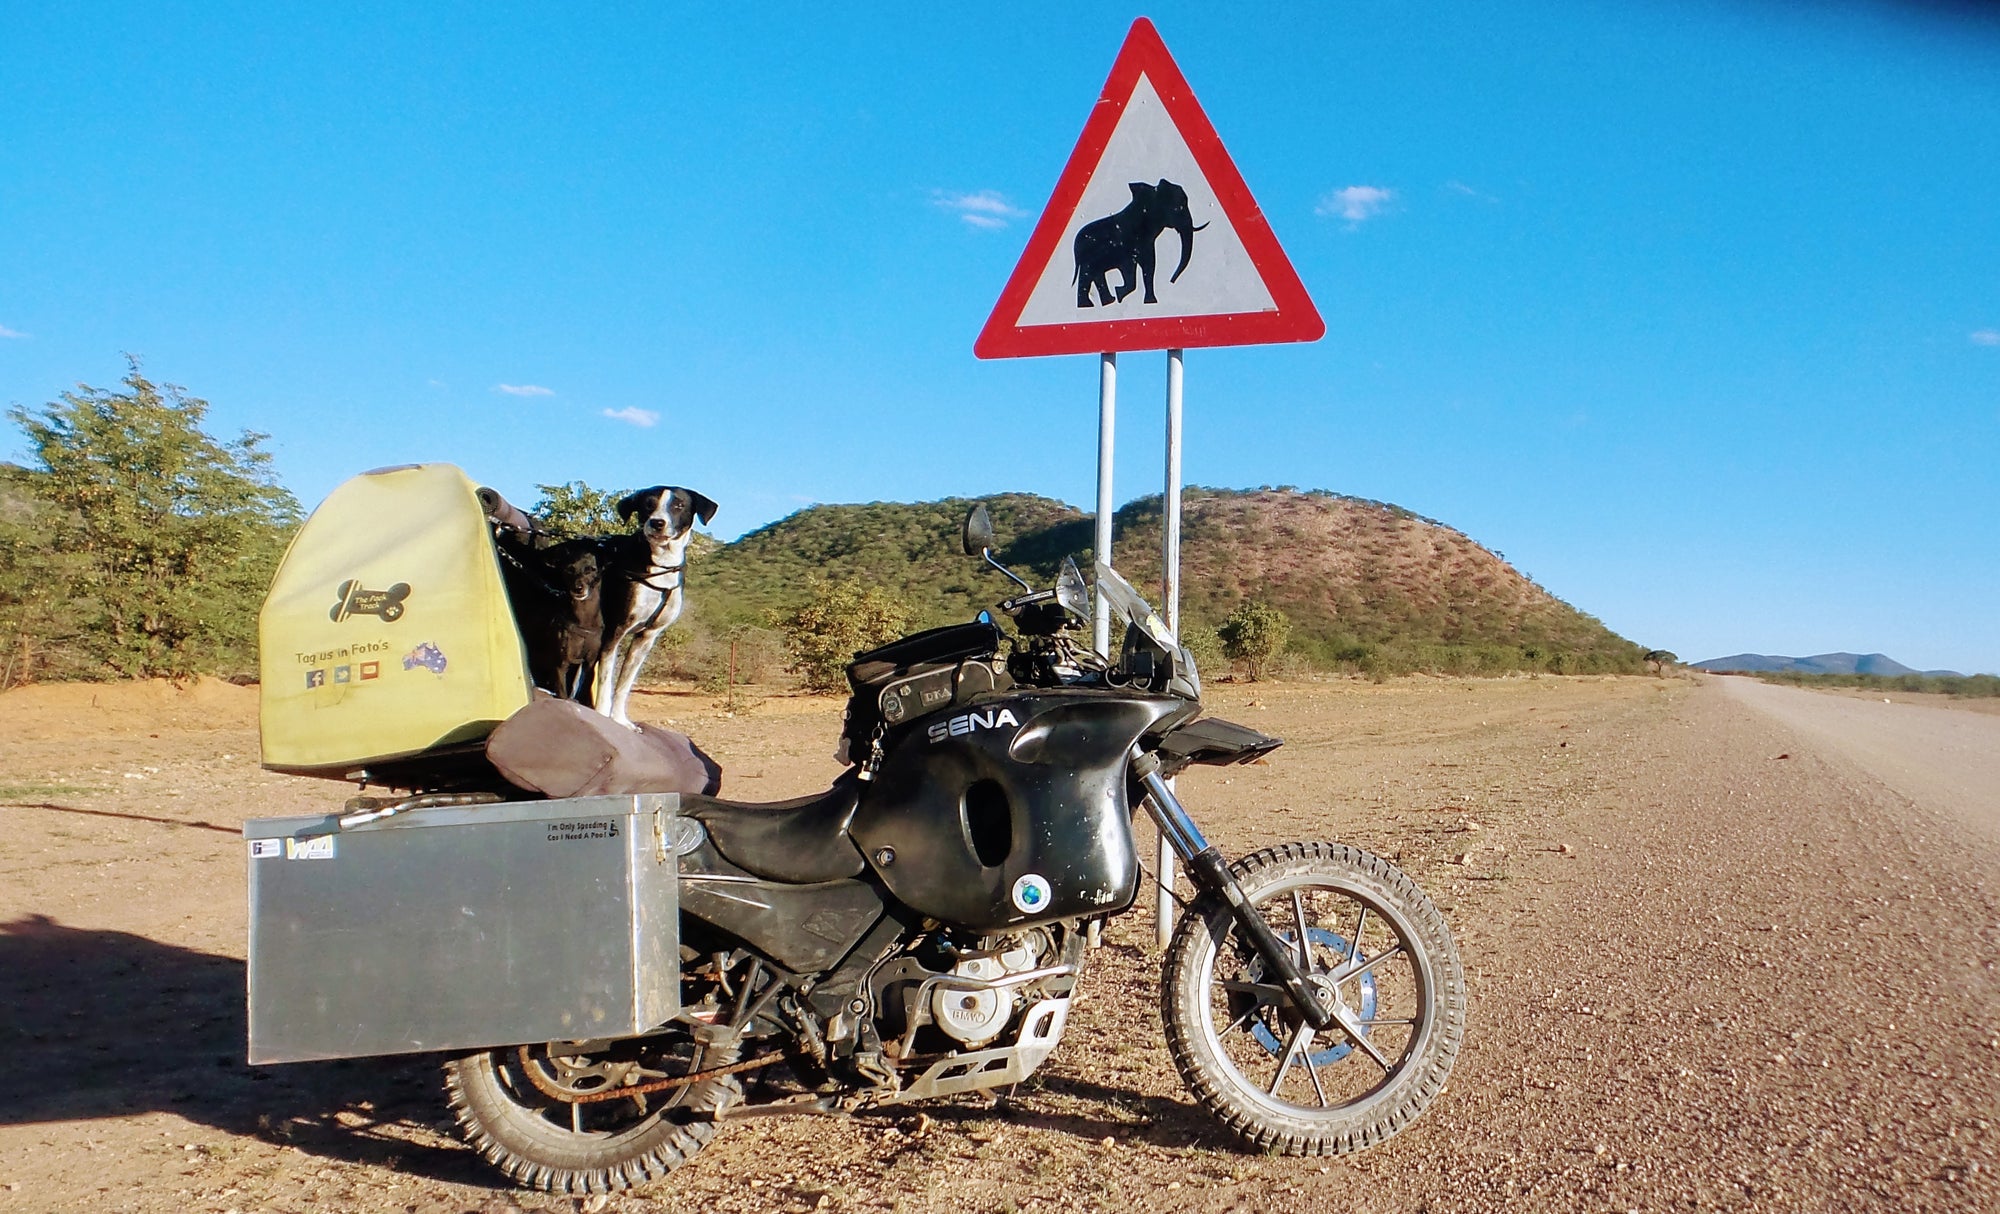 Our search for Elephants started in Burkina Faso. Pictured here is Weeti and Shadow on the lookout in Namibia. We actually didn't see wild Elephants until Zimbabwe.